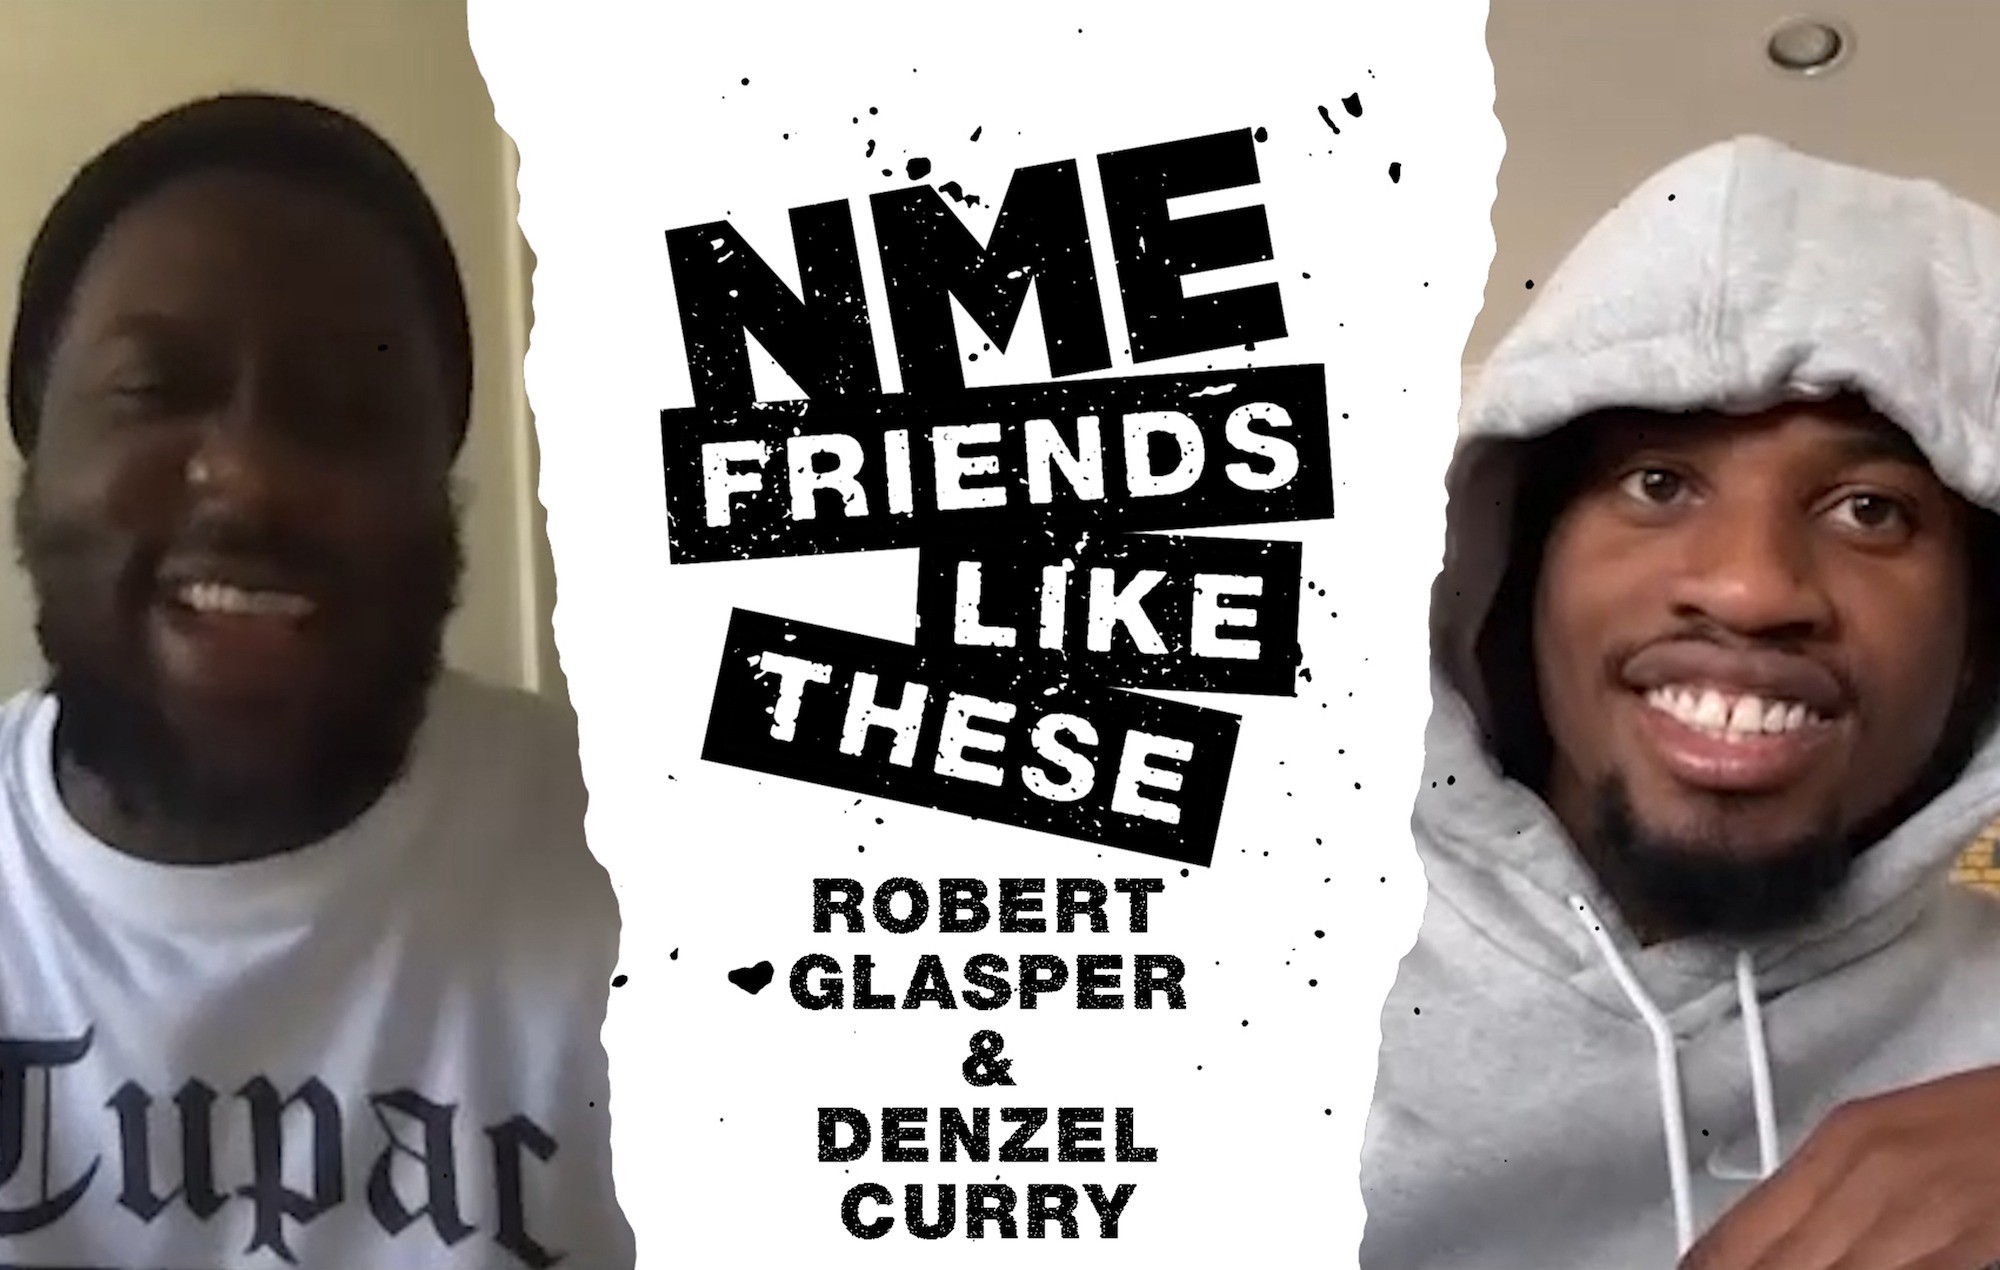 NME Friends Like These: Denzel Curry x Robert Glasper